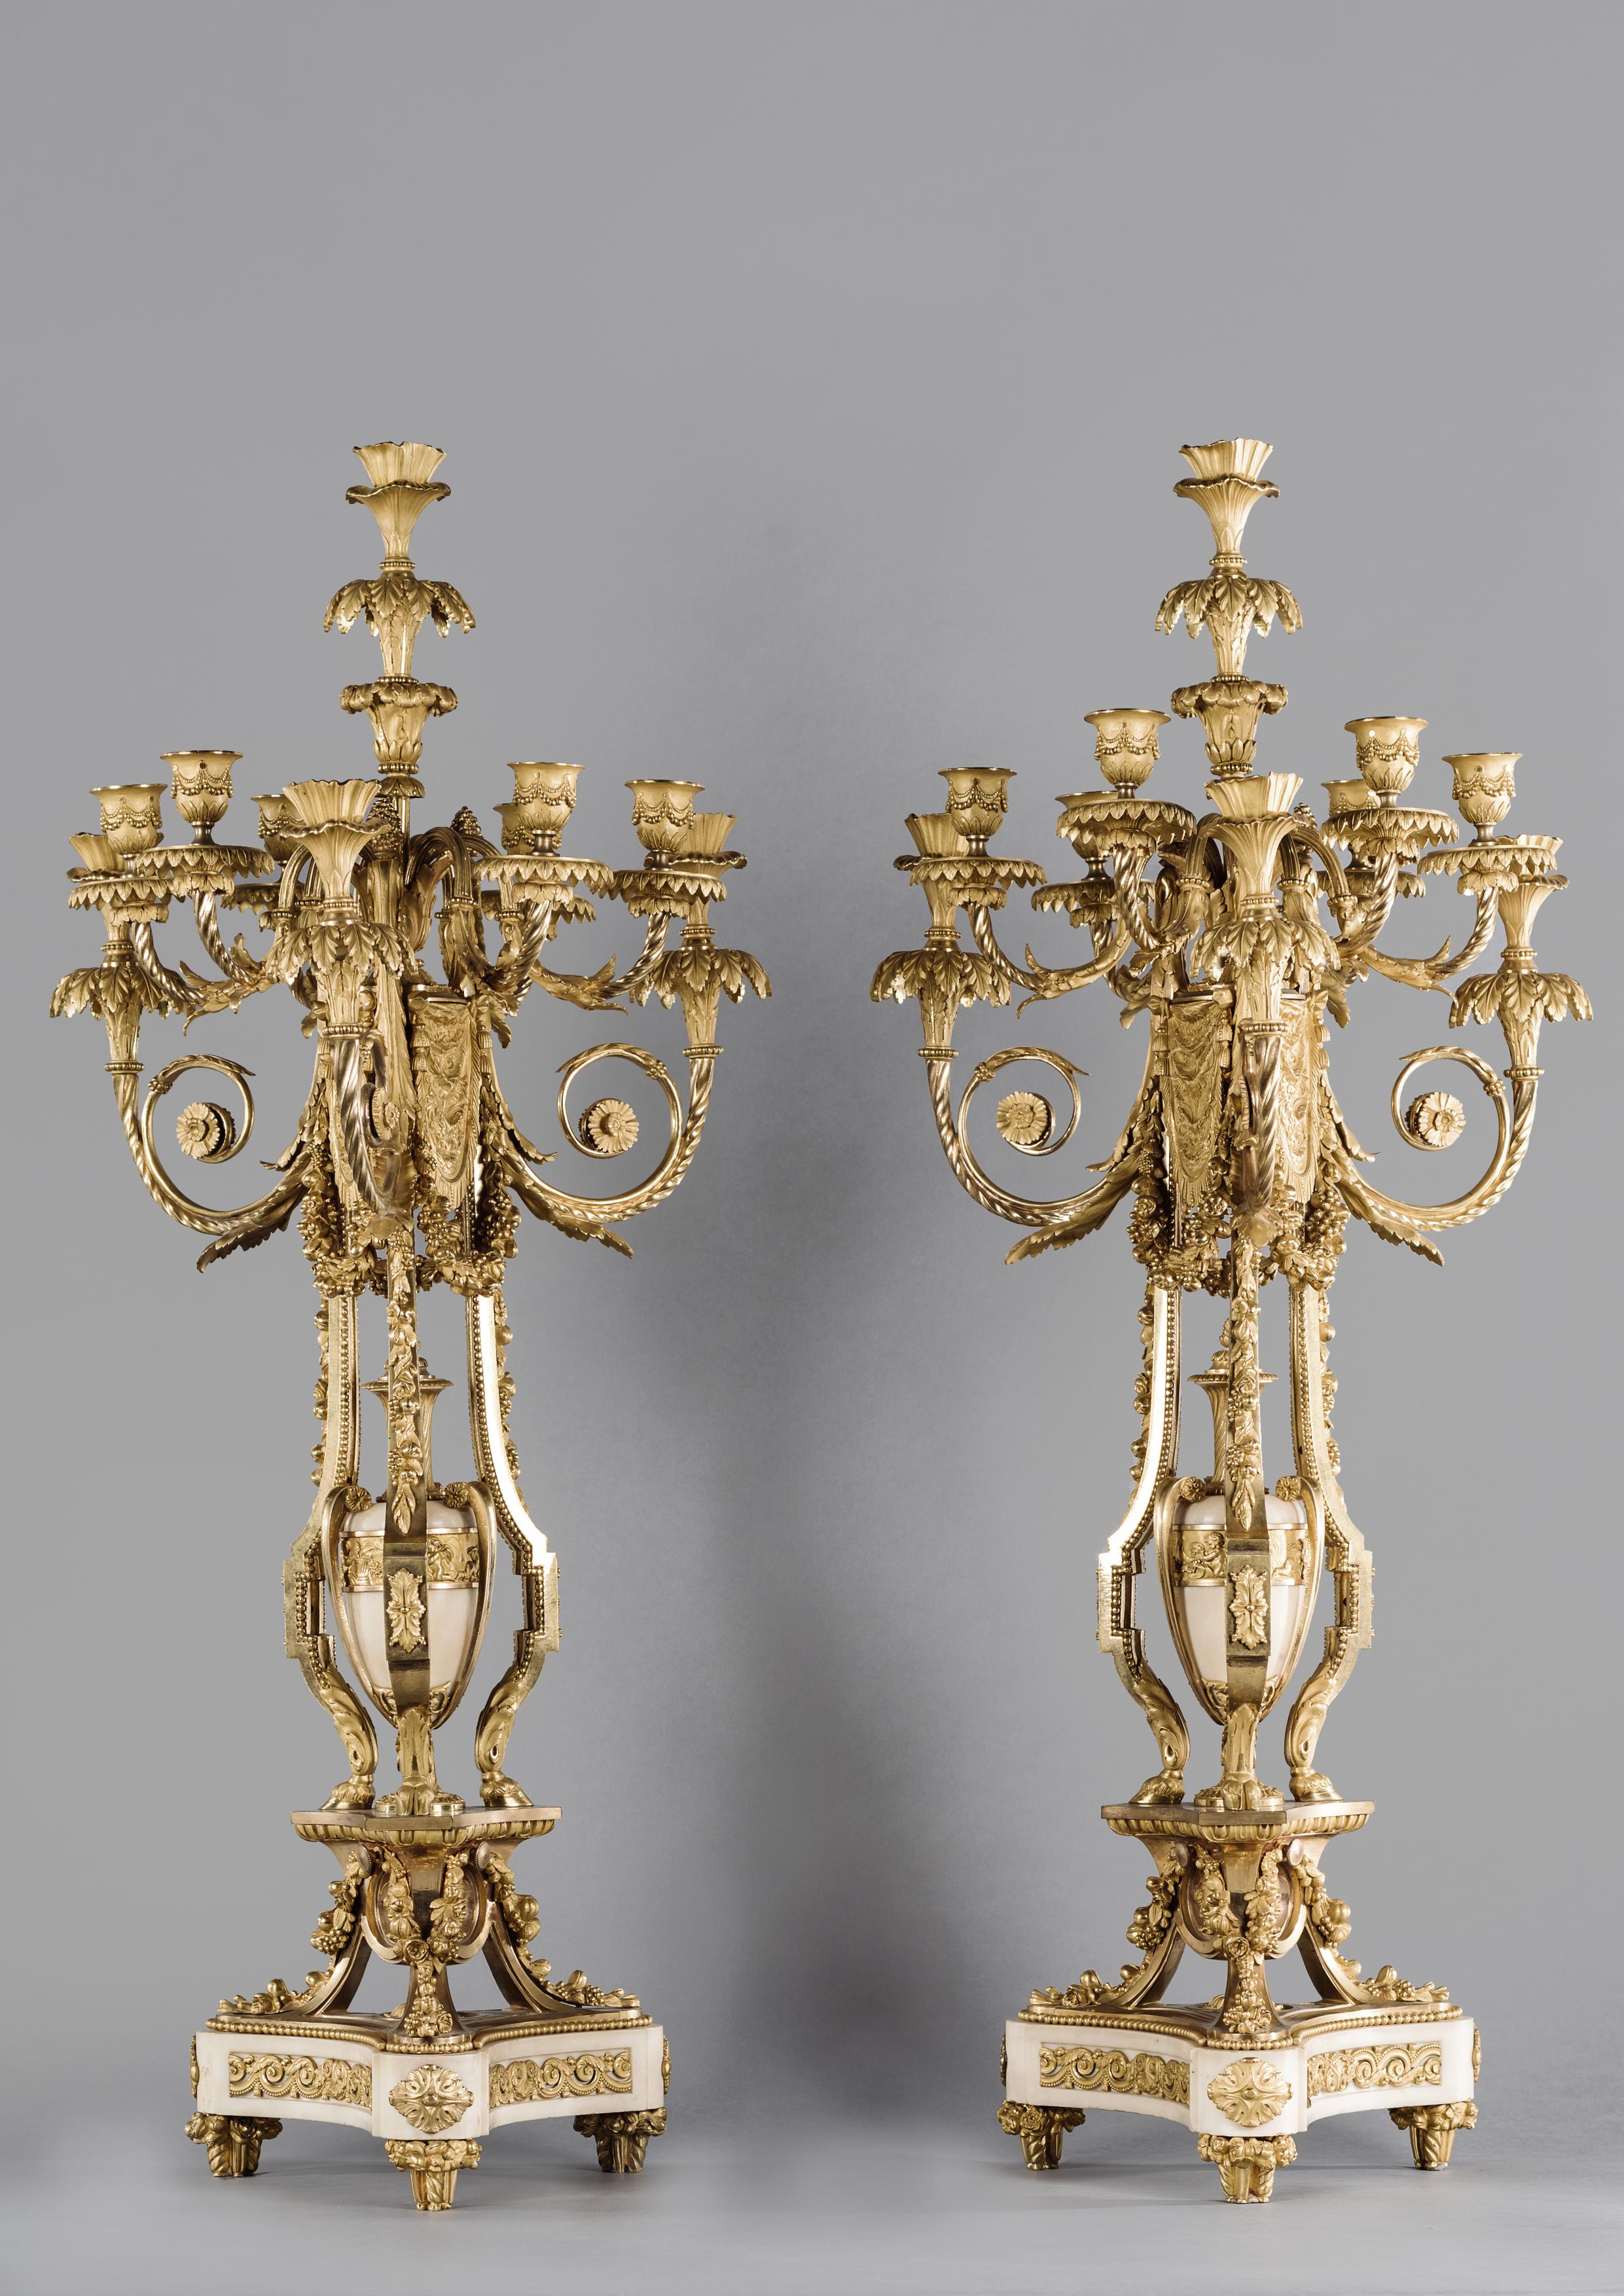 A Fine Pair Of Gilt-Bronze And White Marble Ten-Light Candelabra After The Model by Pierre Gouthière, by Henri Picard.

French, Circa 1870. 

The gilt-bronze variously stamped 'PP'.

This fine pair of candelabra with marble urns, masks and